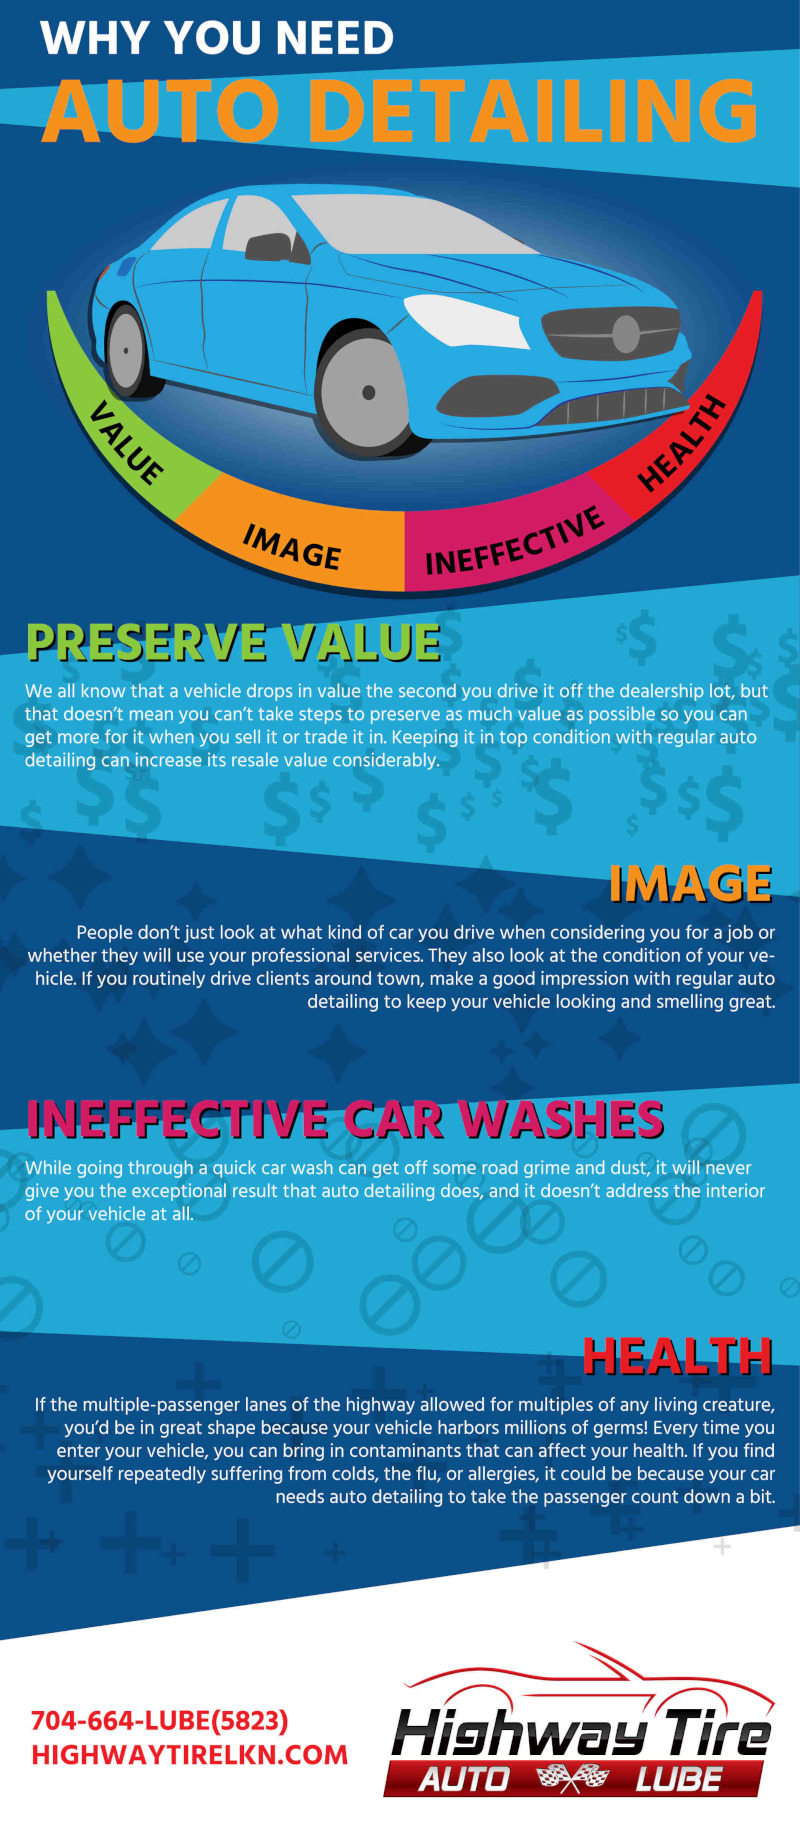 Why You Need Auto Detailing [infographic]